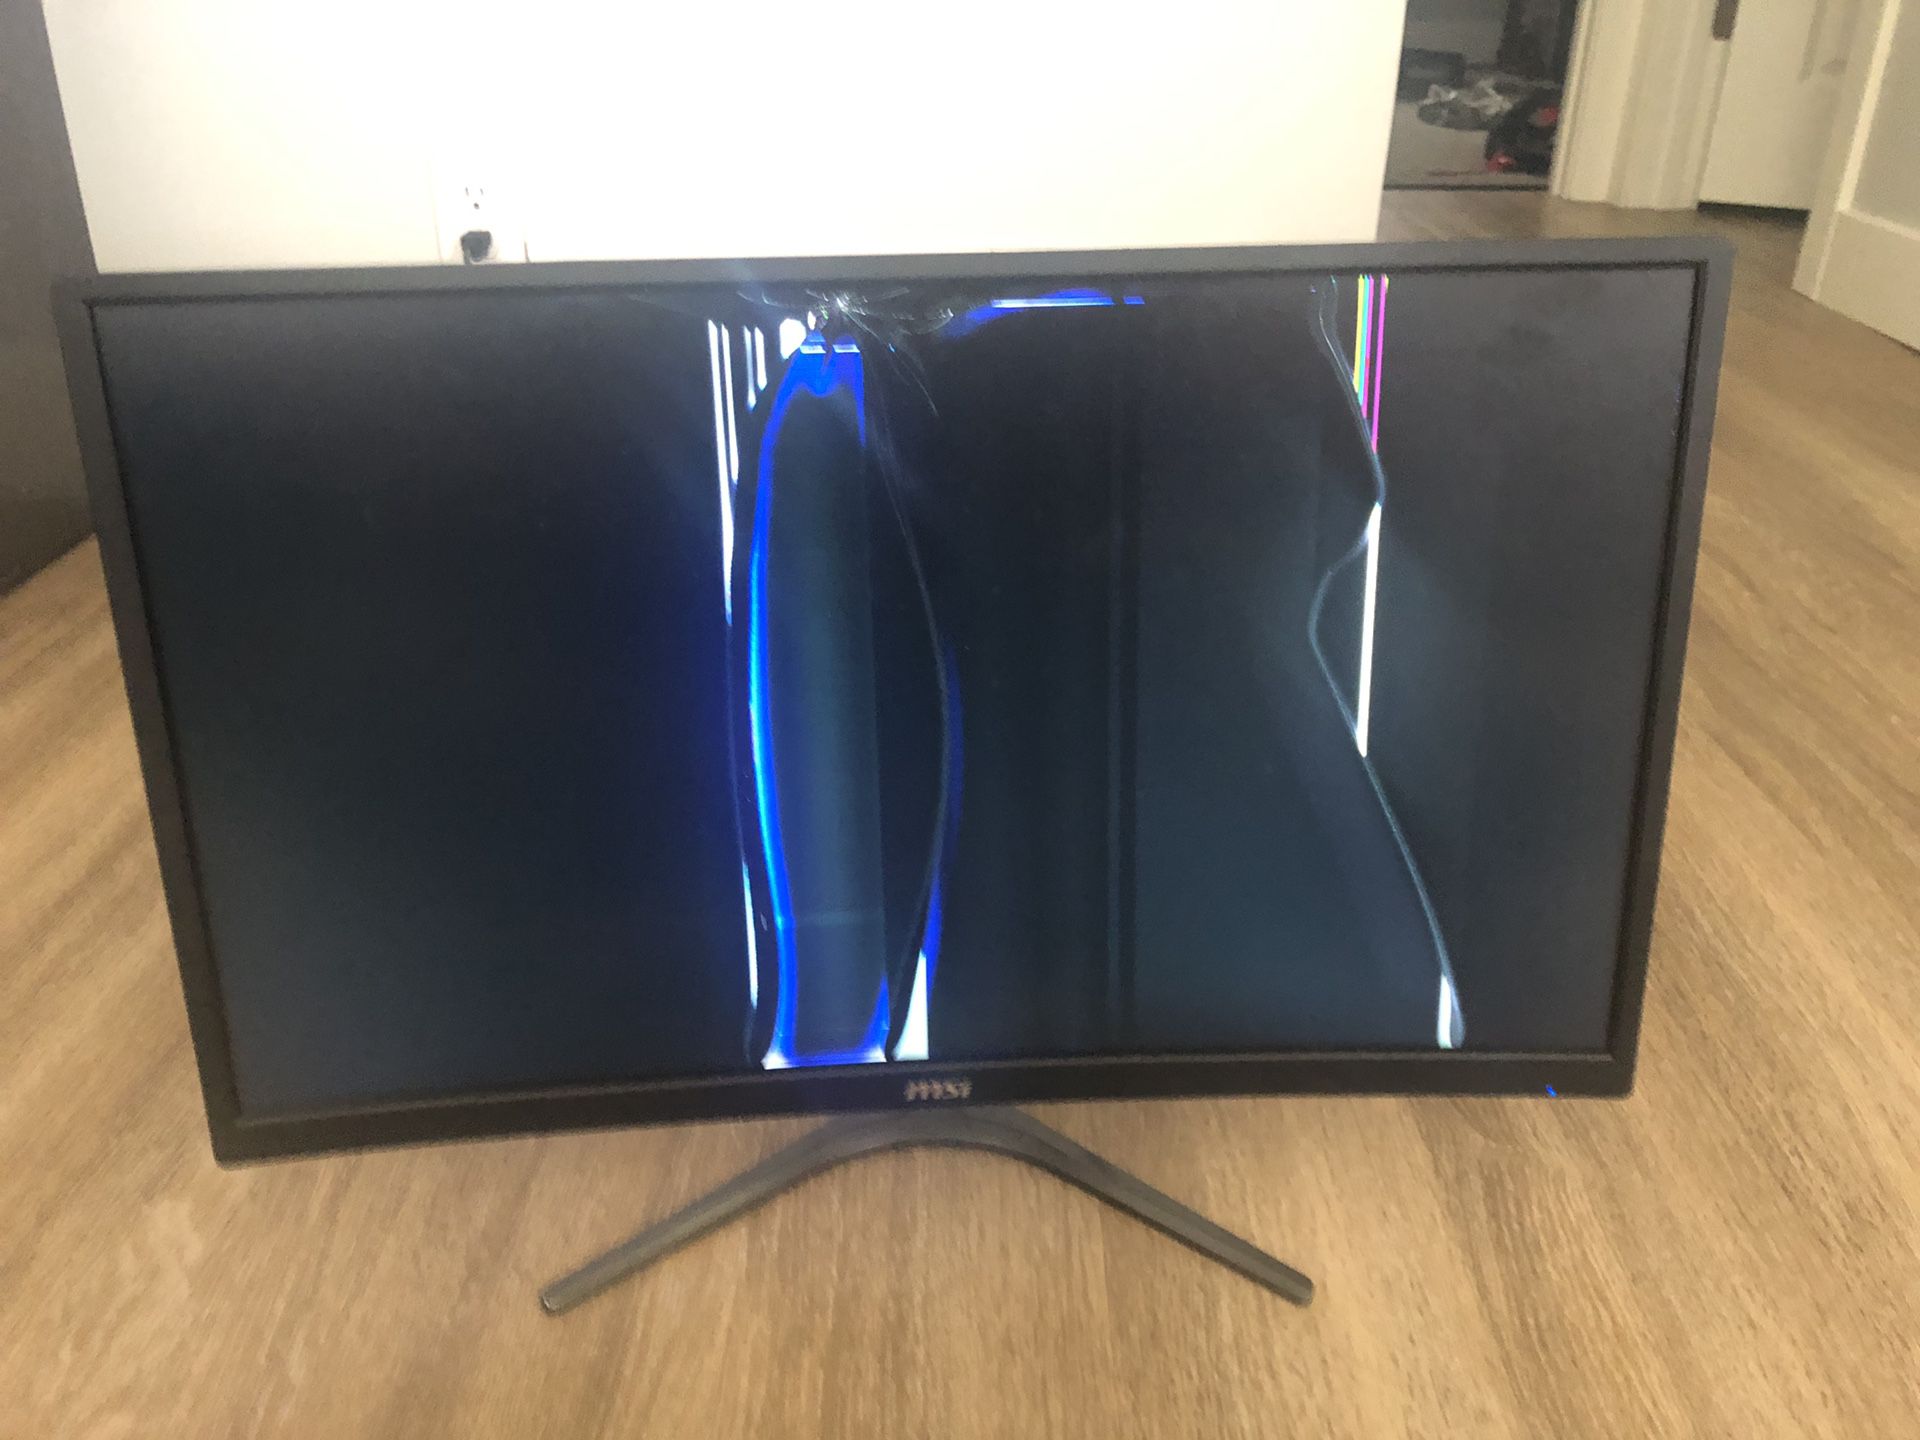 Msi g24c curves Monitor for parts